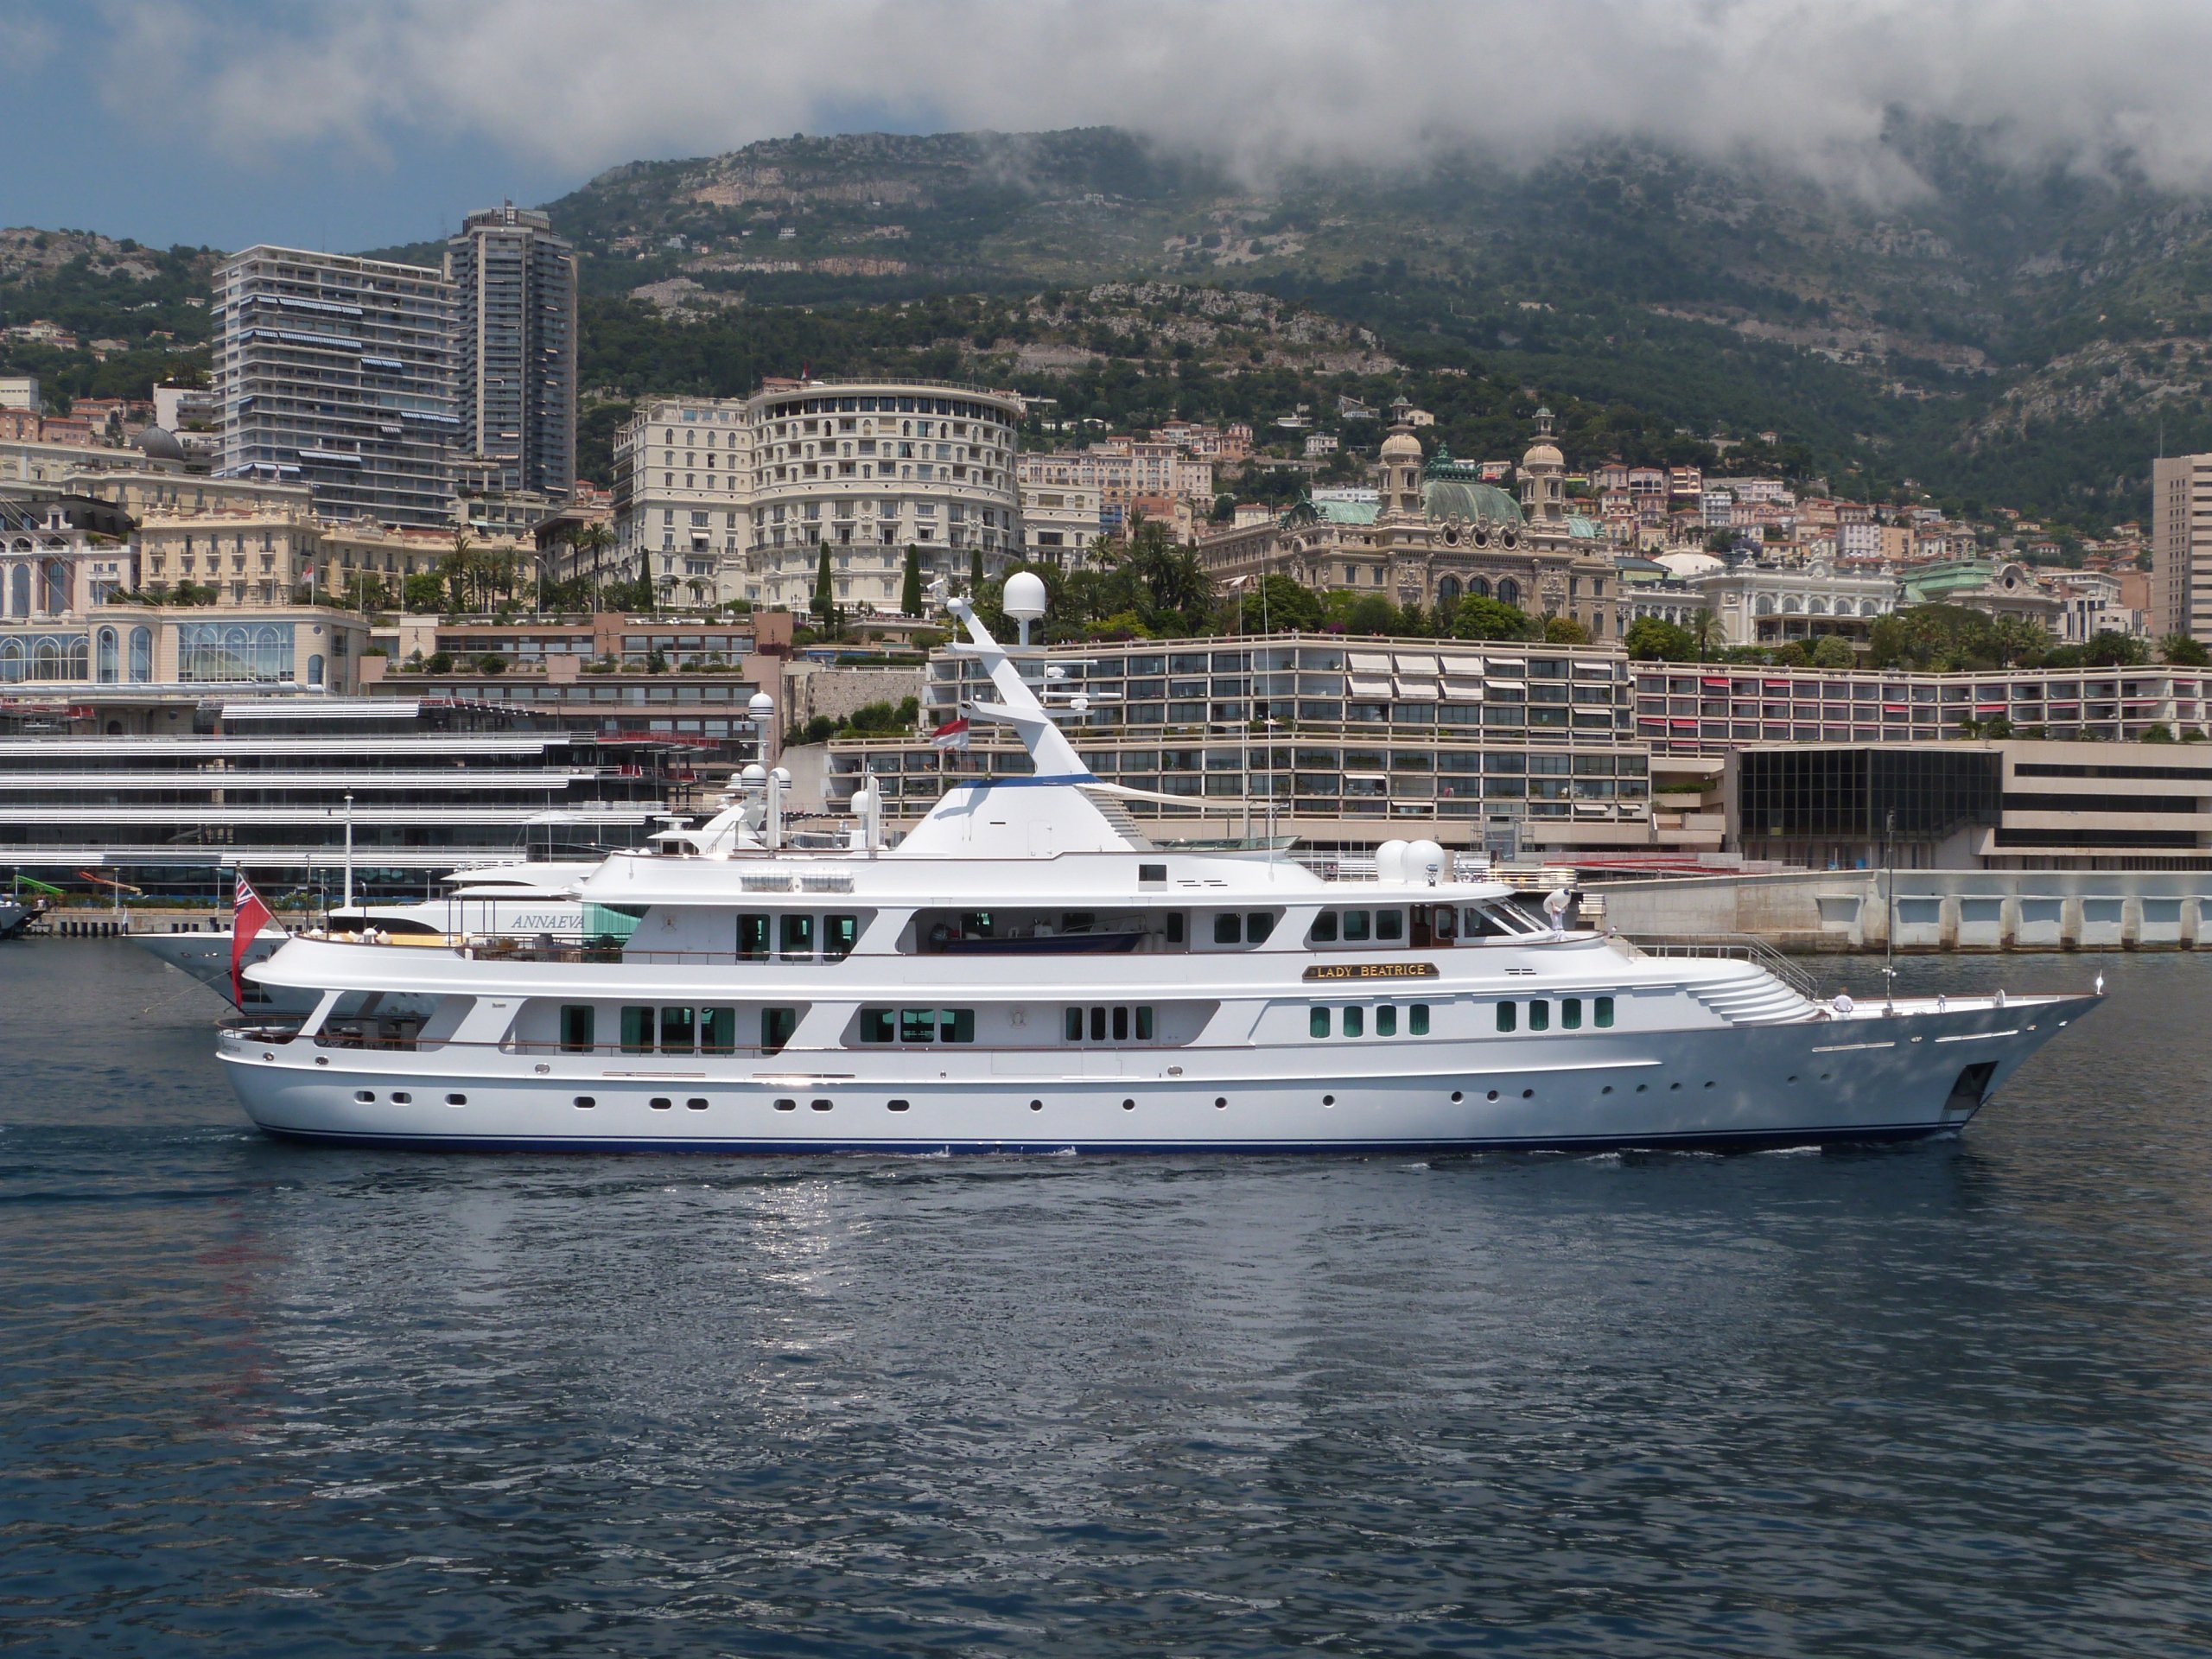 LADY BEATRICE Yacht - Feadship - 1993 - propriétaires Barclay Brothers